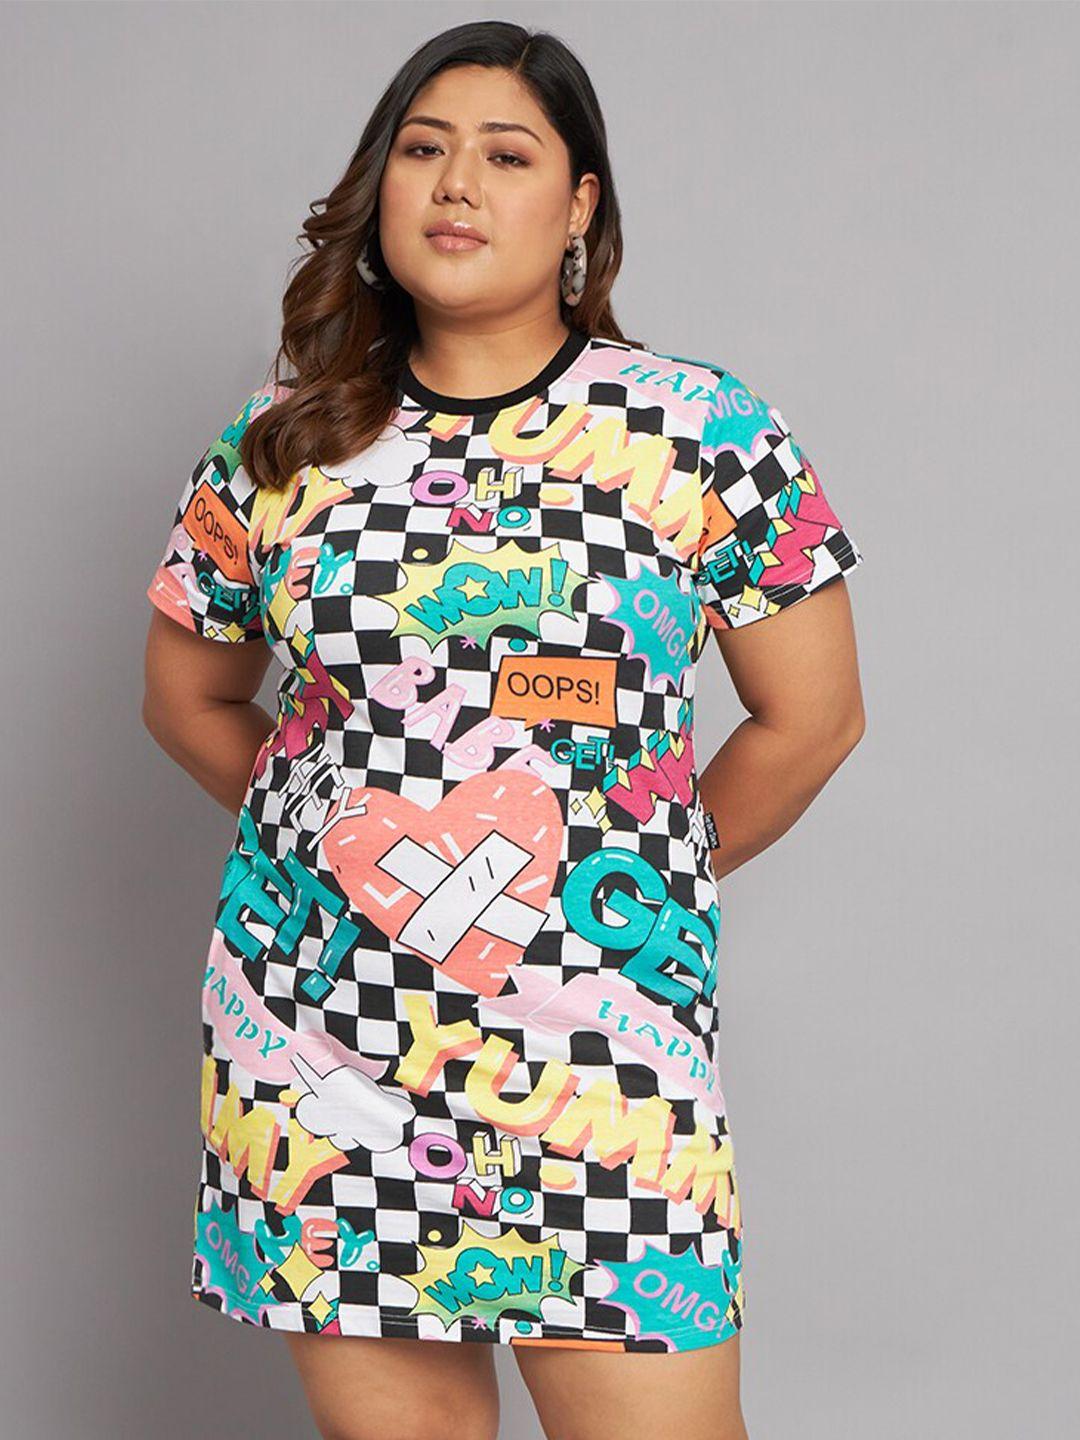 BEYOUND SIZE - THE DRY STATE Plus Size Graphic Printed Cotton T-shirt Dress